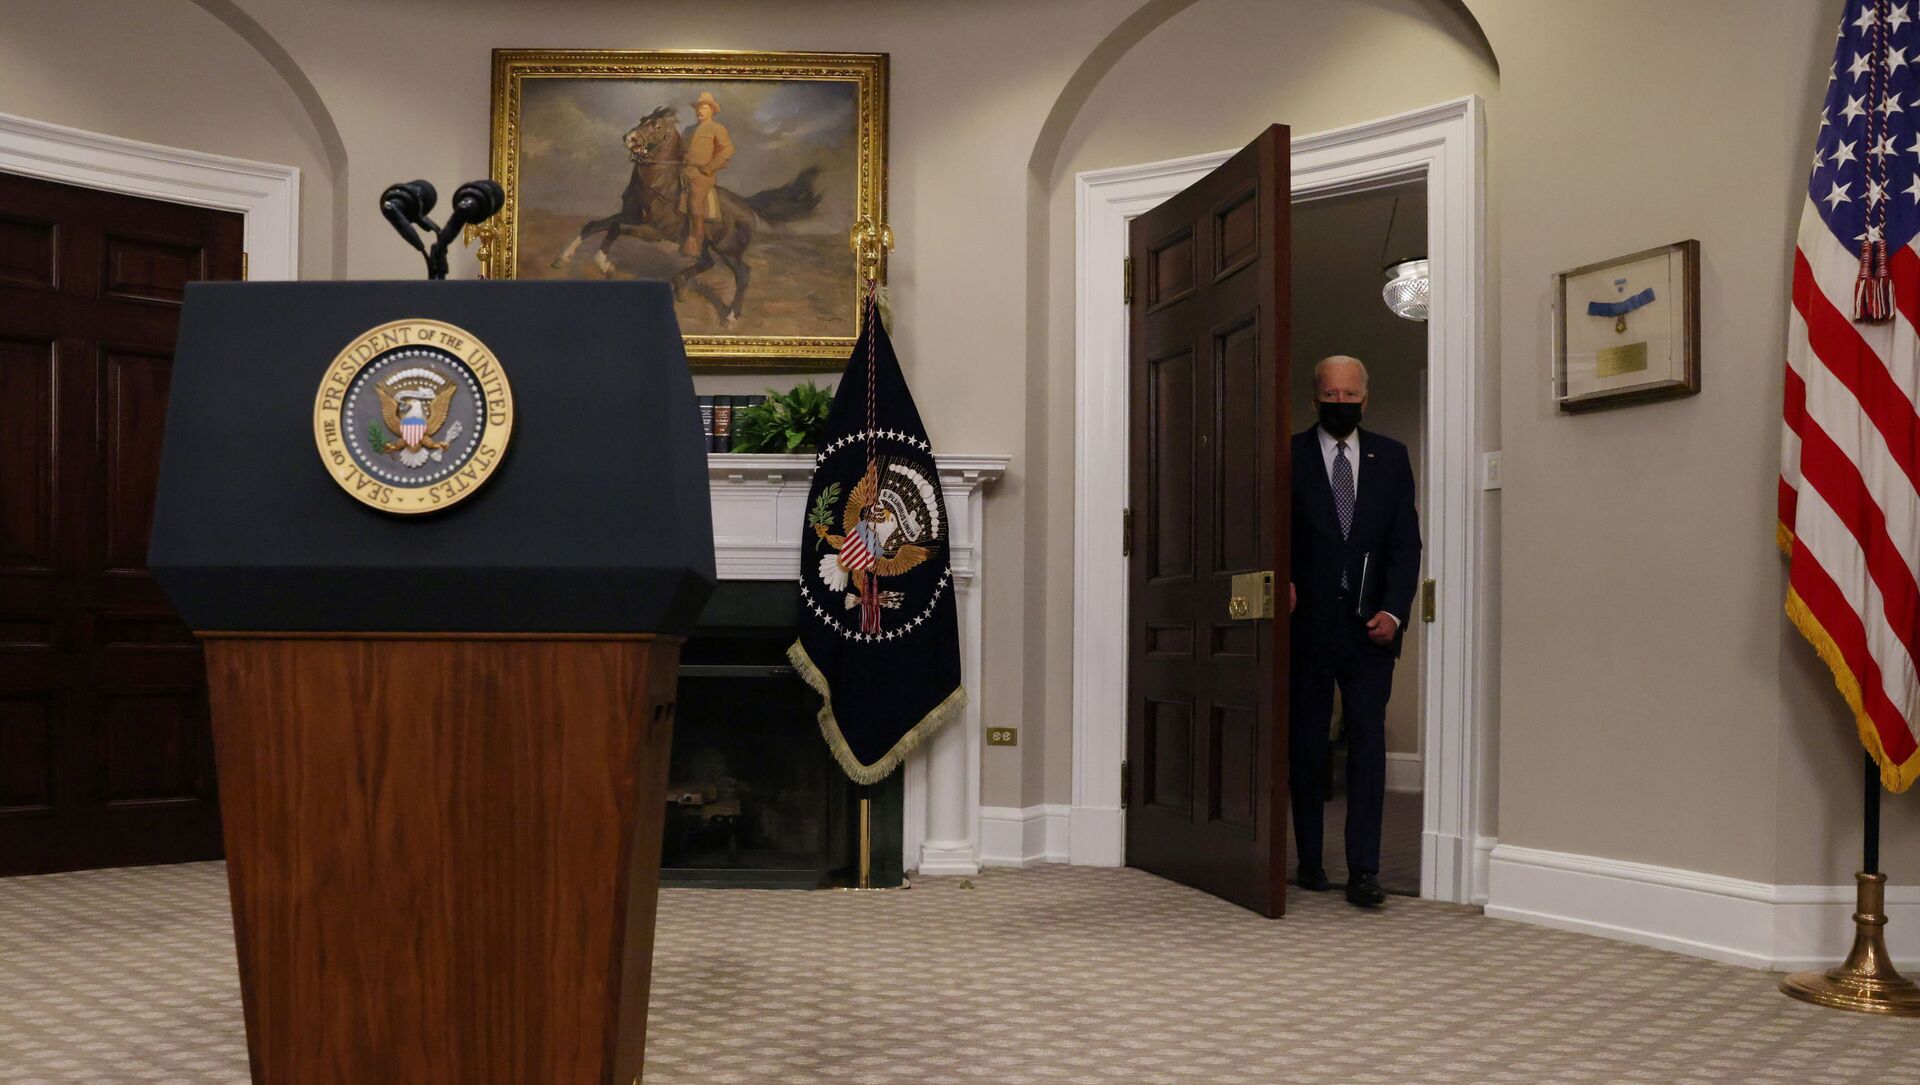 U.S. President Joe Biden enters the room to give a statement about the U.S. withdrawal from Afghanistan in the Roosevelt Room at the White House in Washington, U.S., August 24, 2021 - Sputnik International, 1920, 26.08.2021